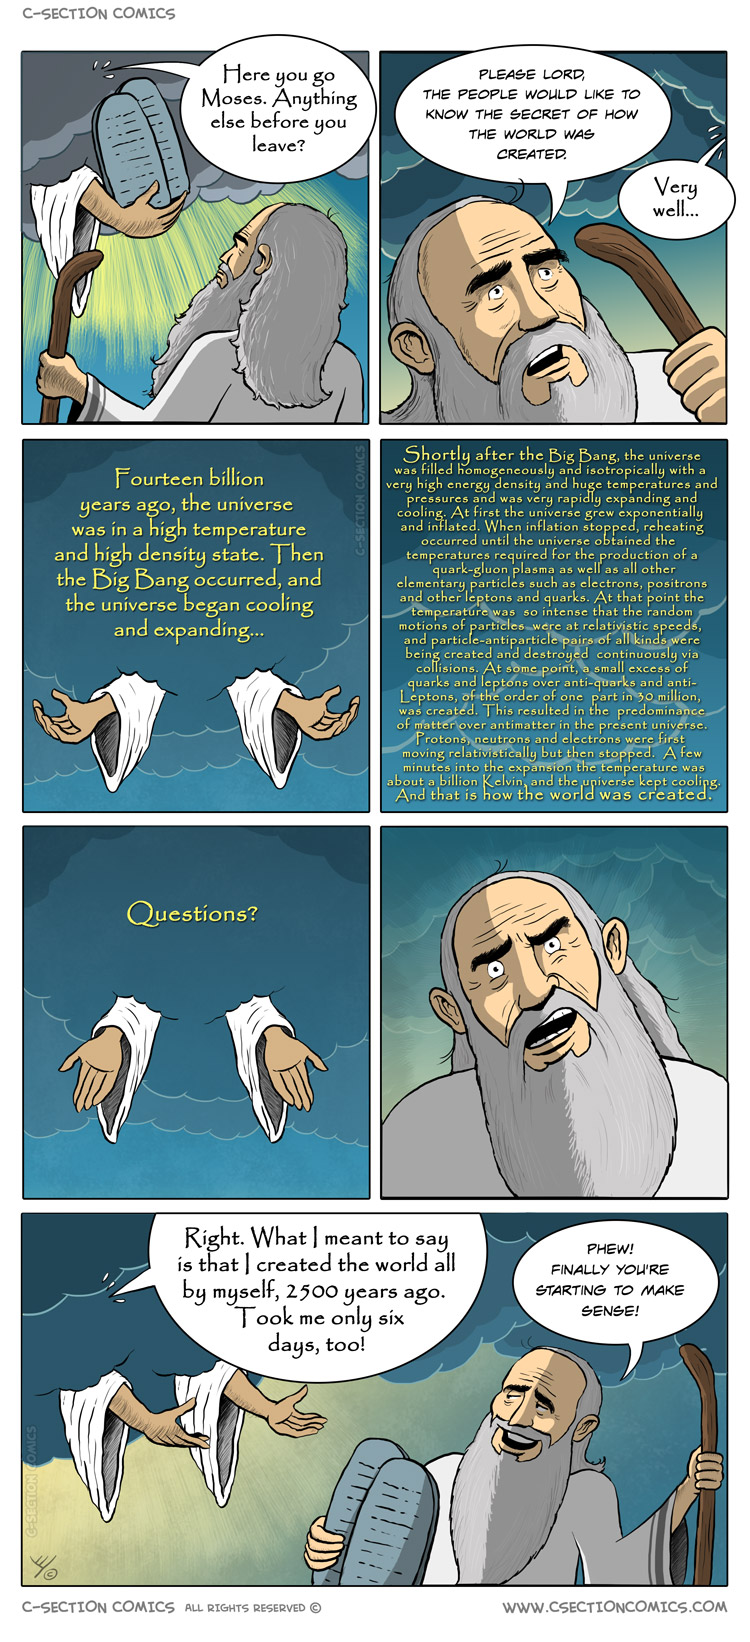 Moses Leans How God Created the World - by C-Section Comics